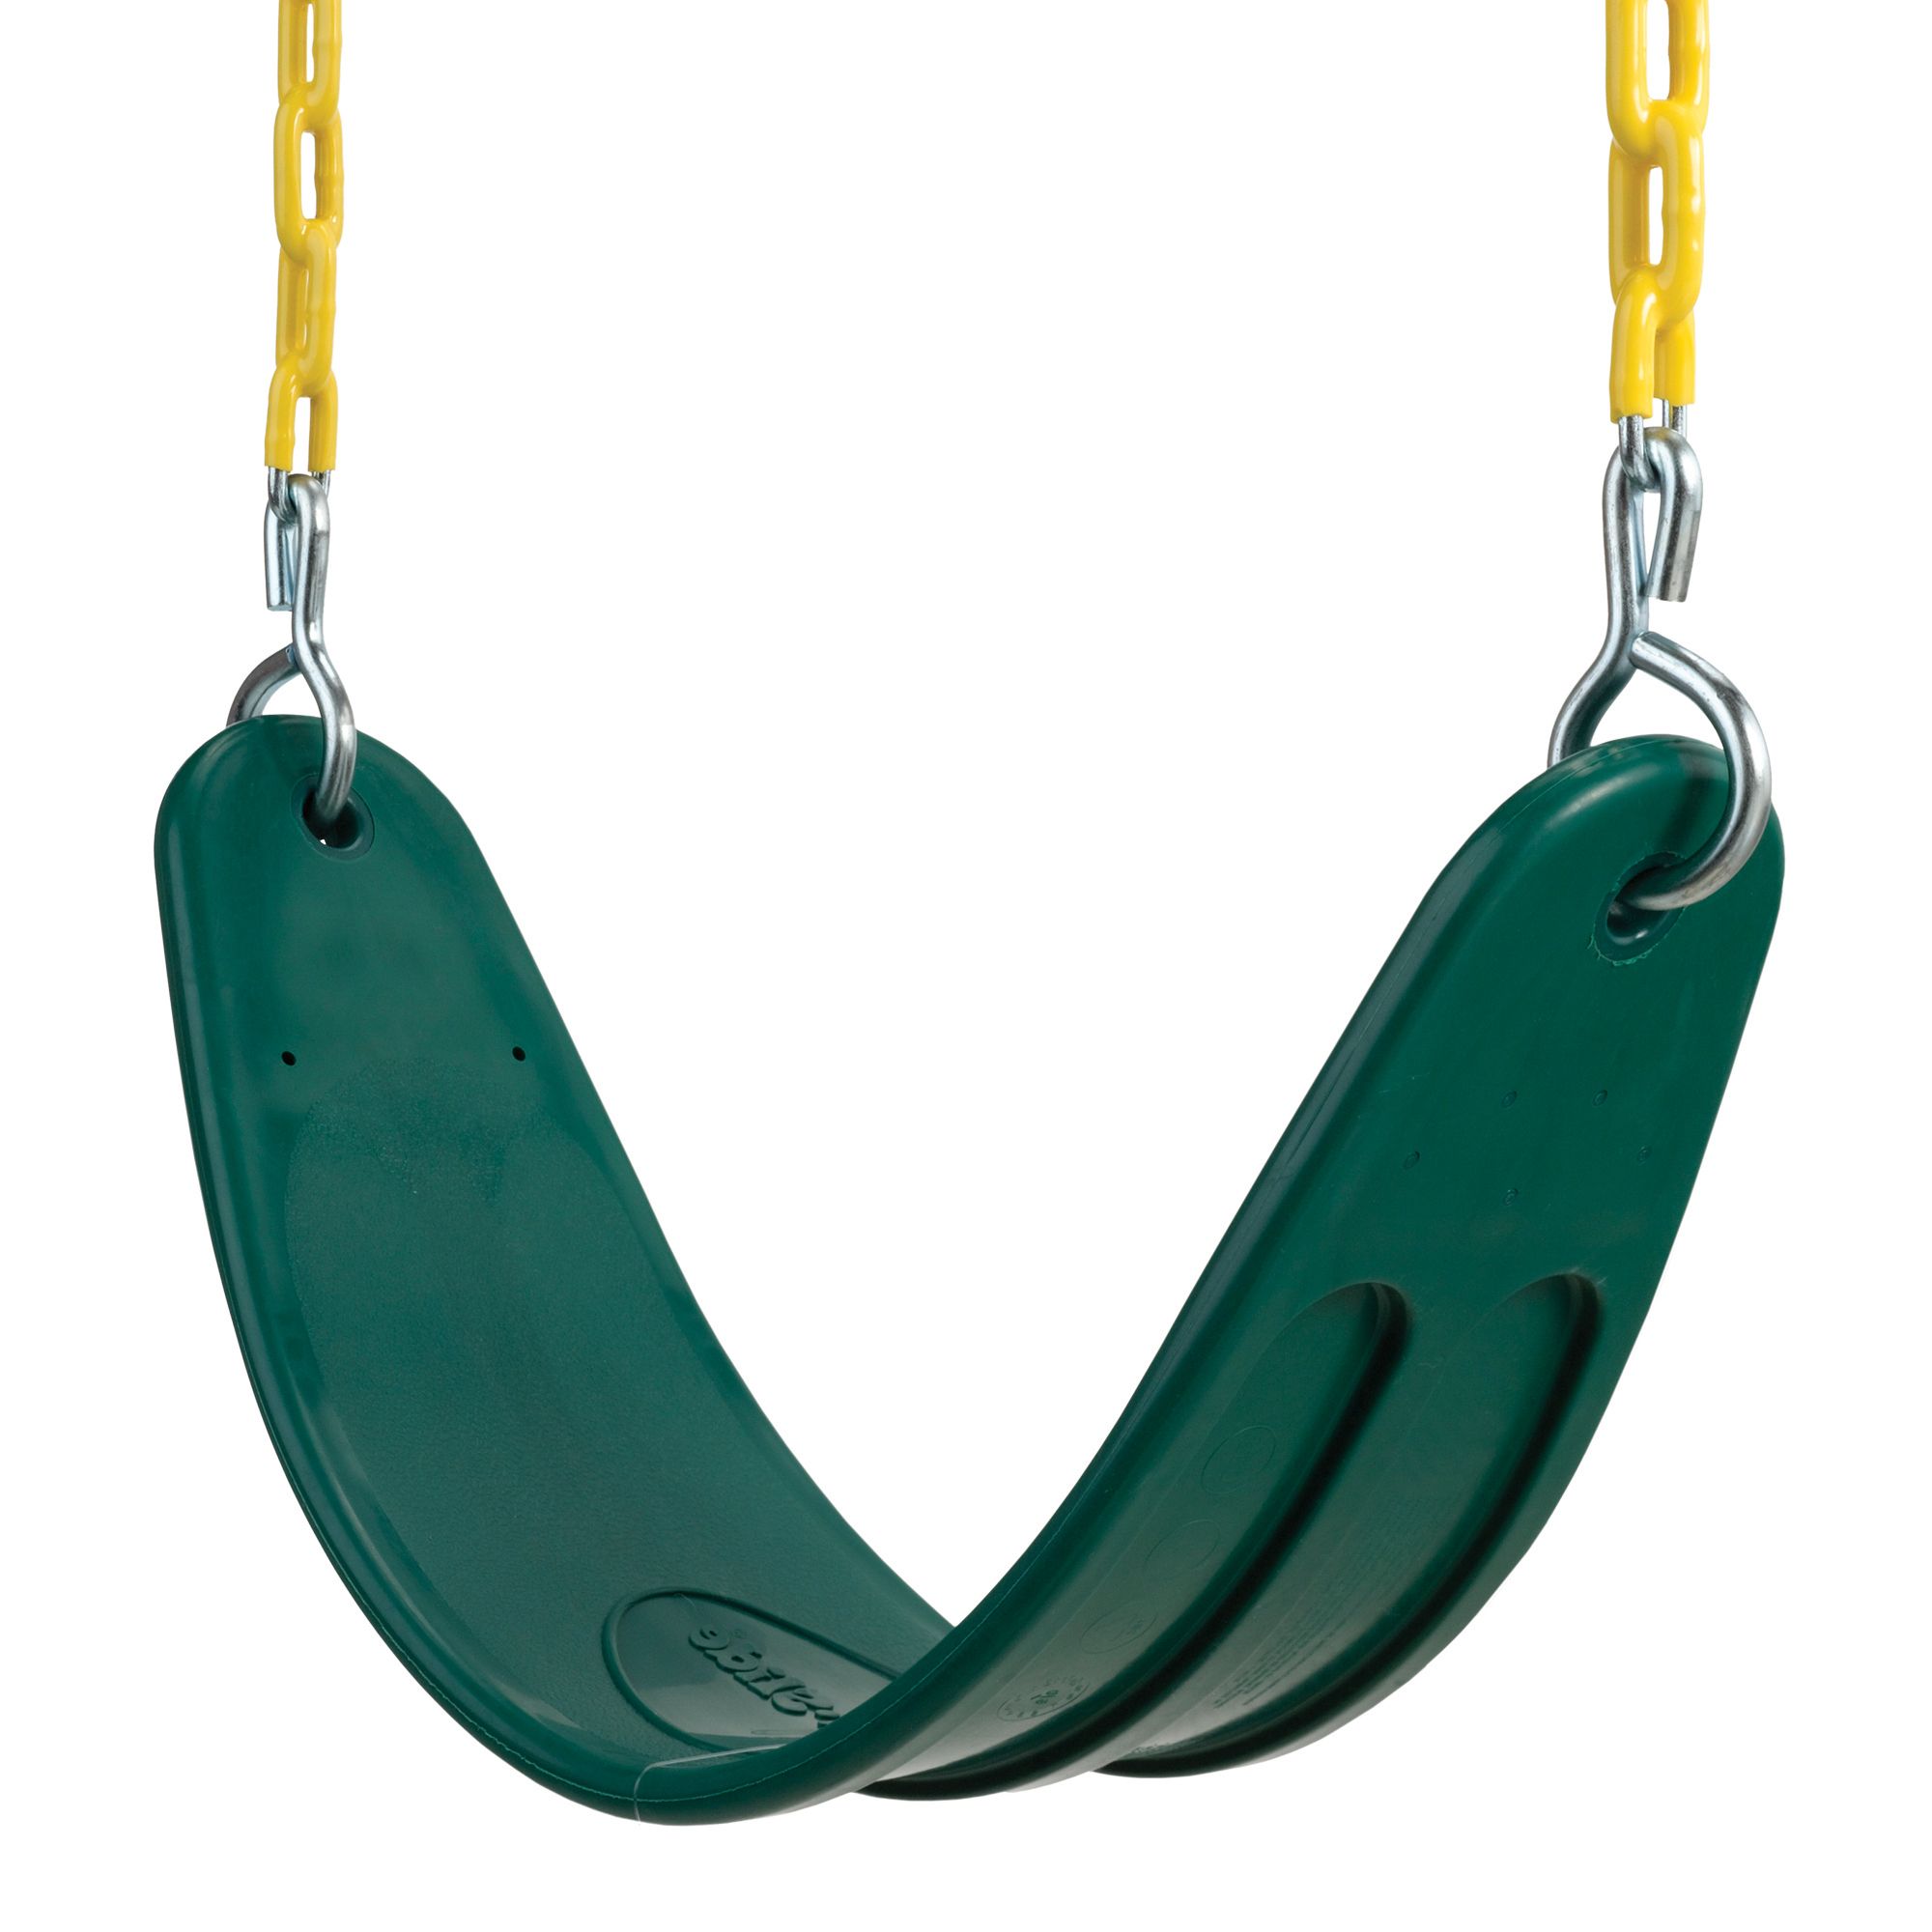 Favorite Swing N Slide Extra Duty Green Swing Seat With Coated Chains – Walmart Throughout Swing Seats With Chains (Photo 5 of 30)